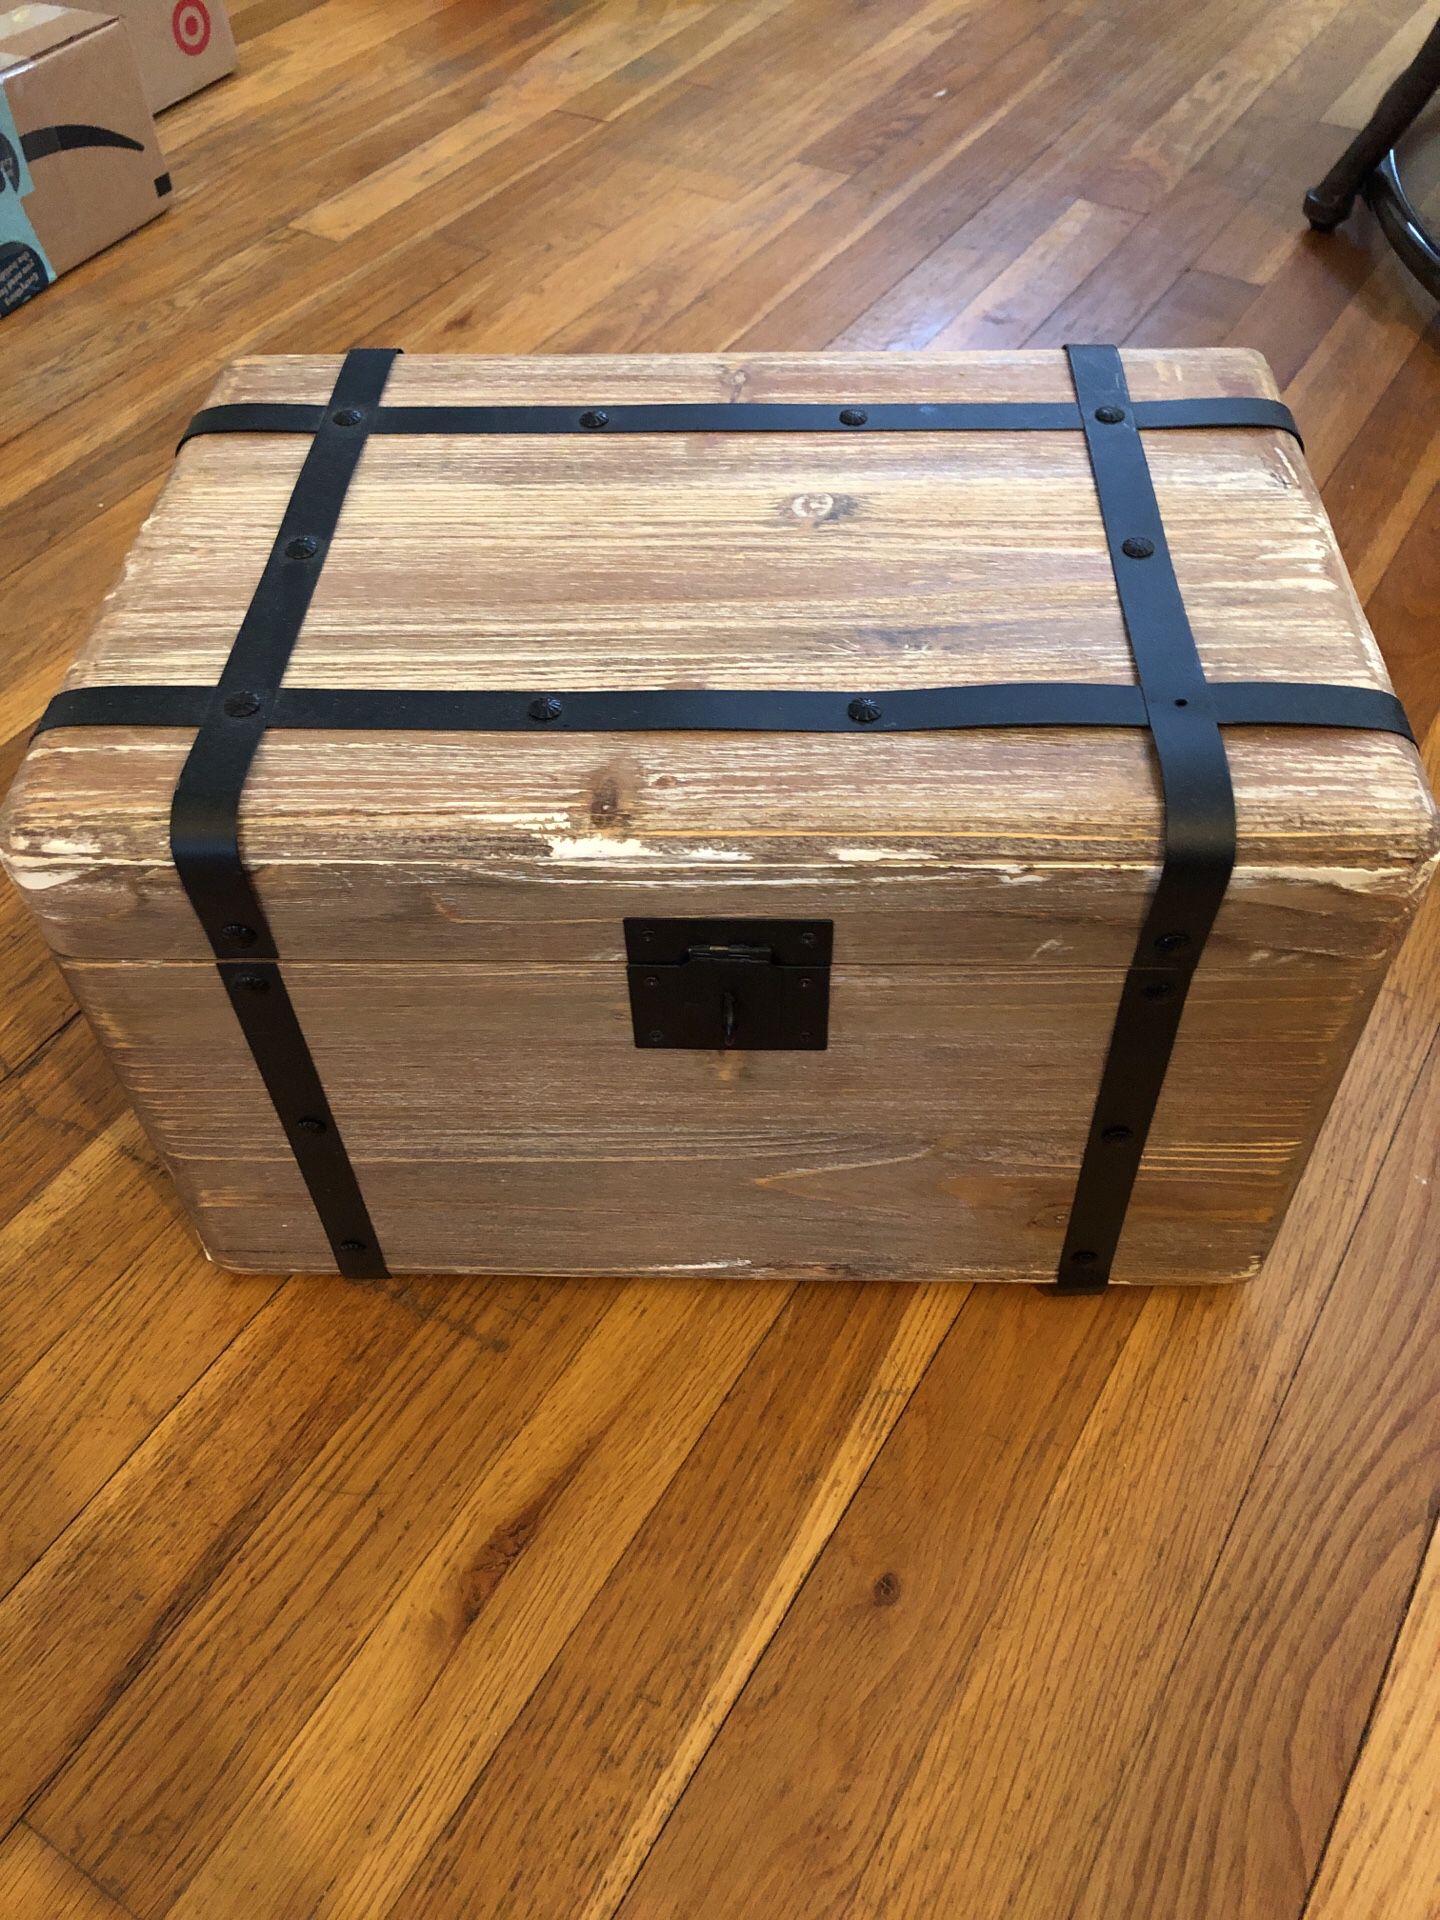 Small wood storage chest